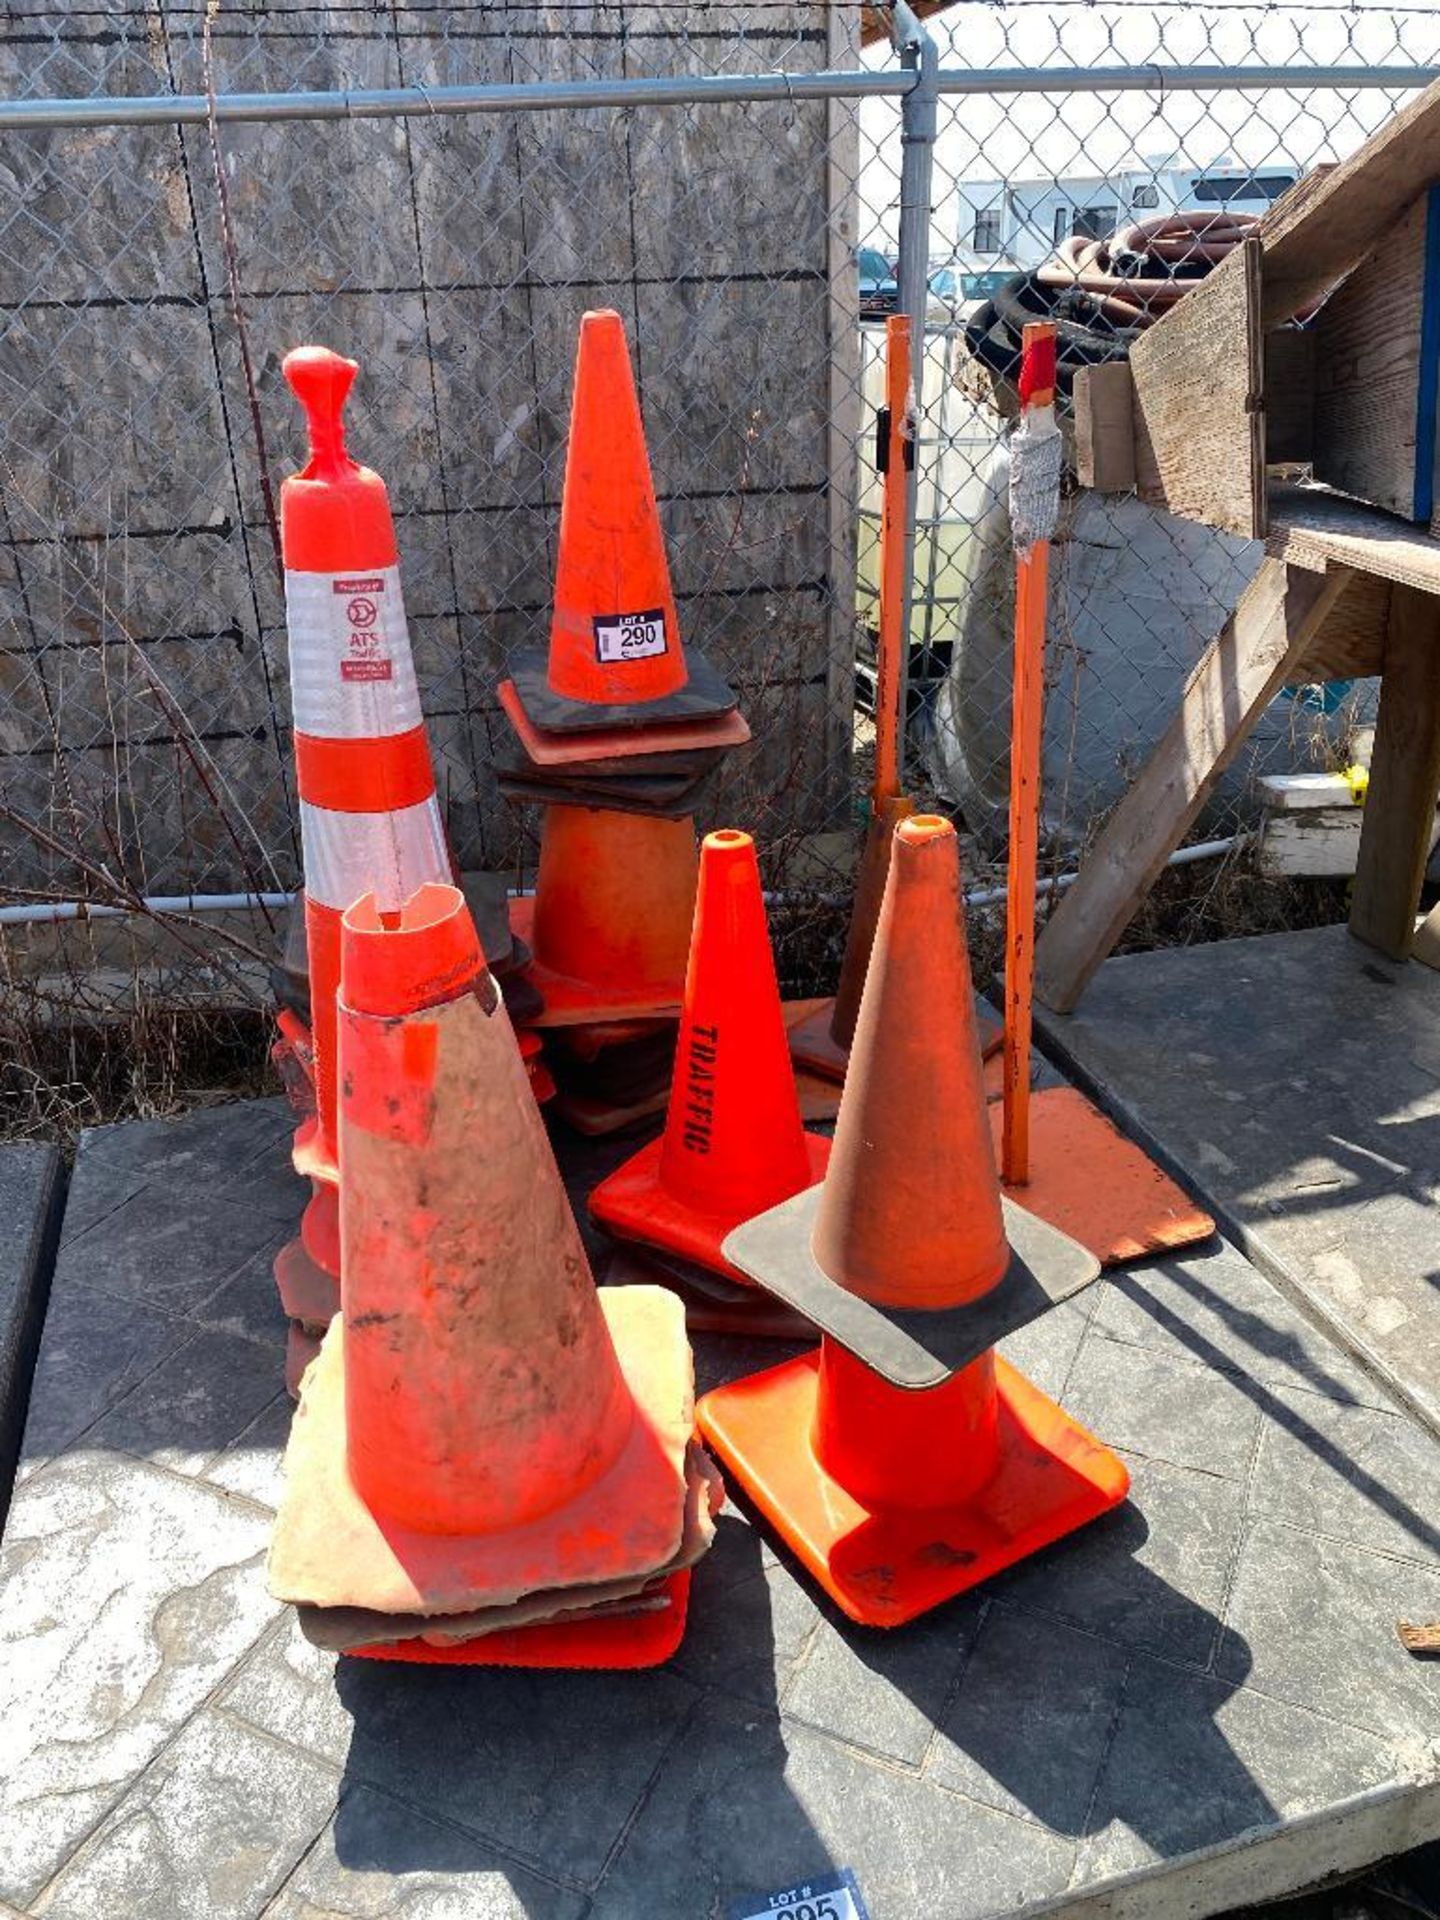 Lot of Asst. Traffic Cones. - Image 2 of 3